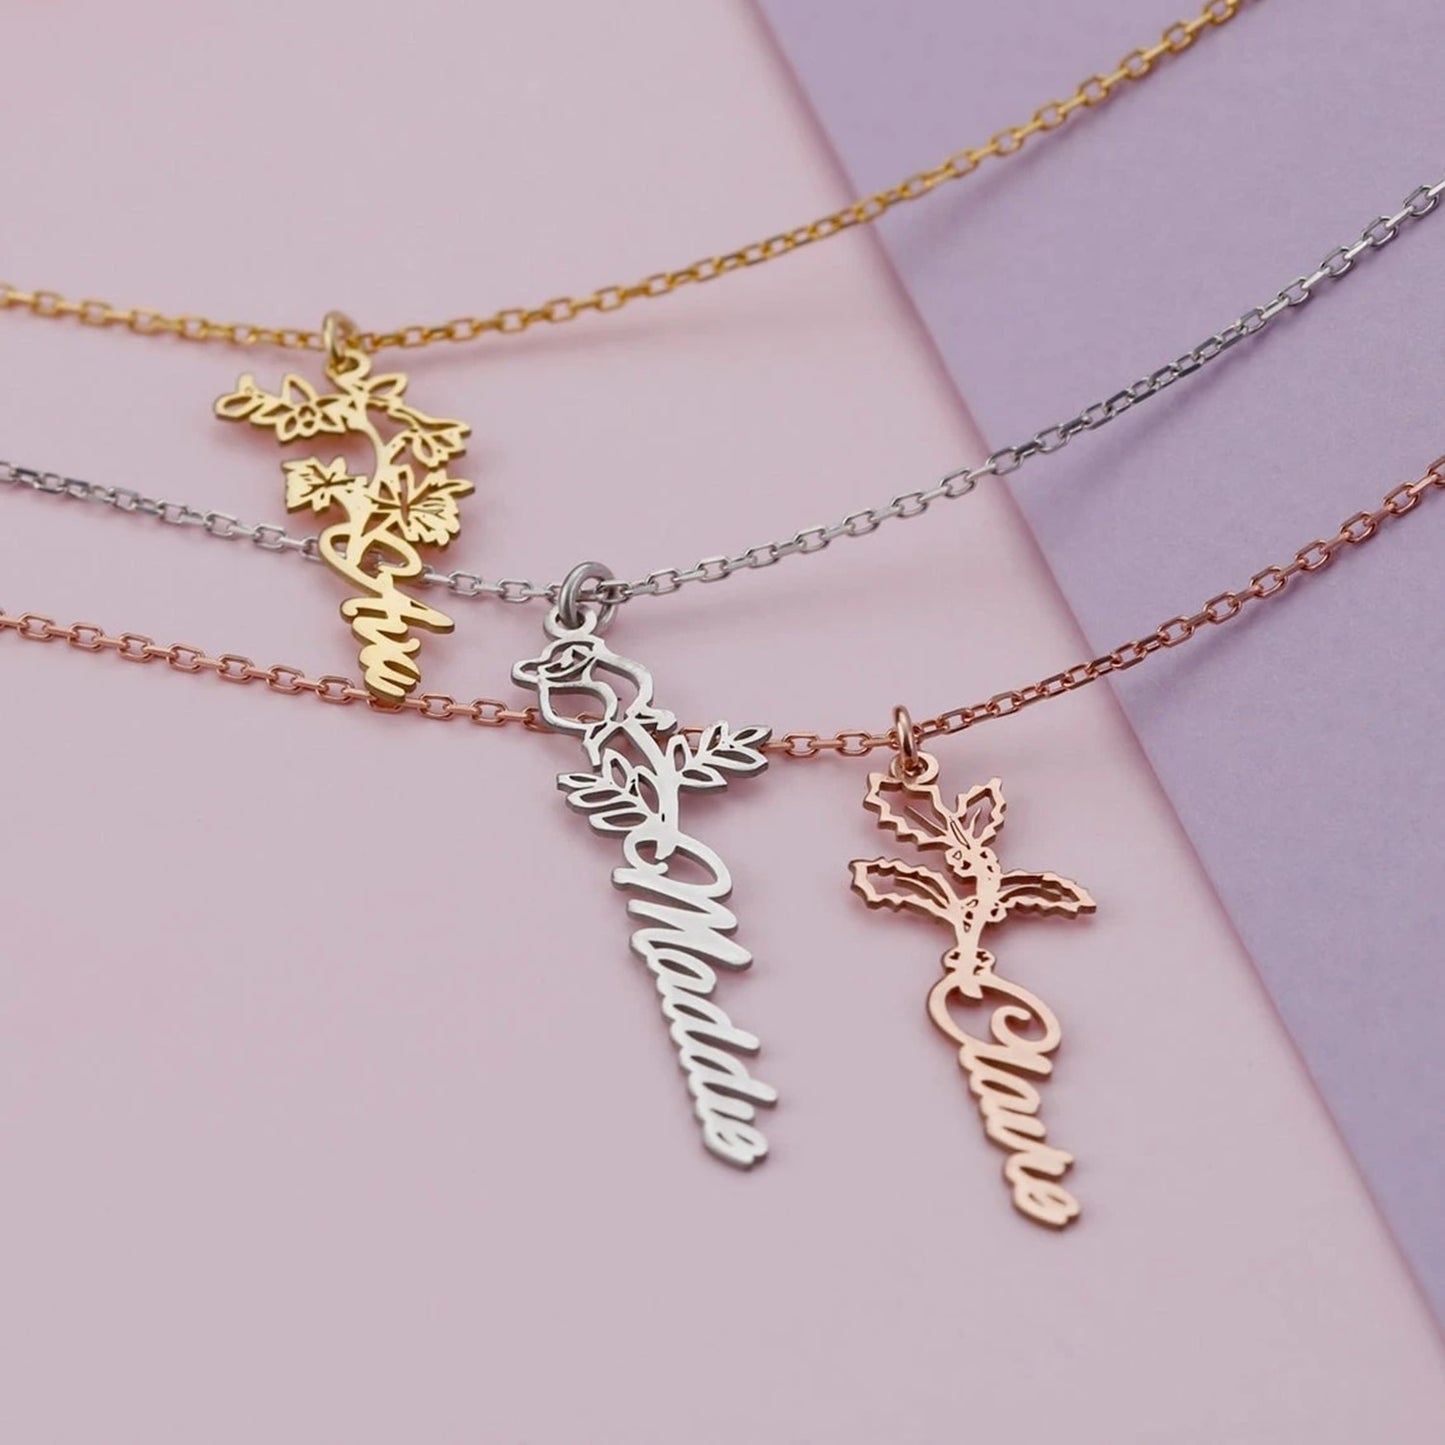 Personalized Custom Name Necklaces Birth Month Flower